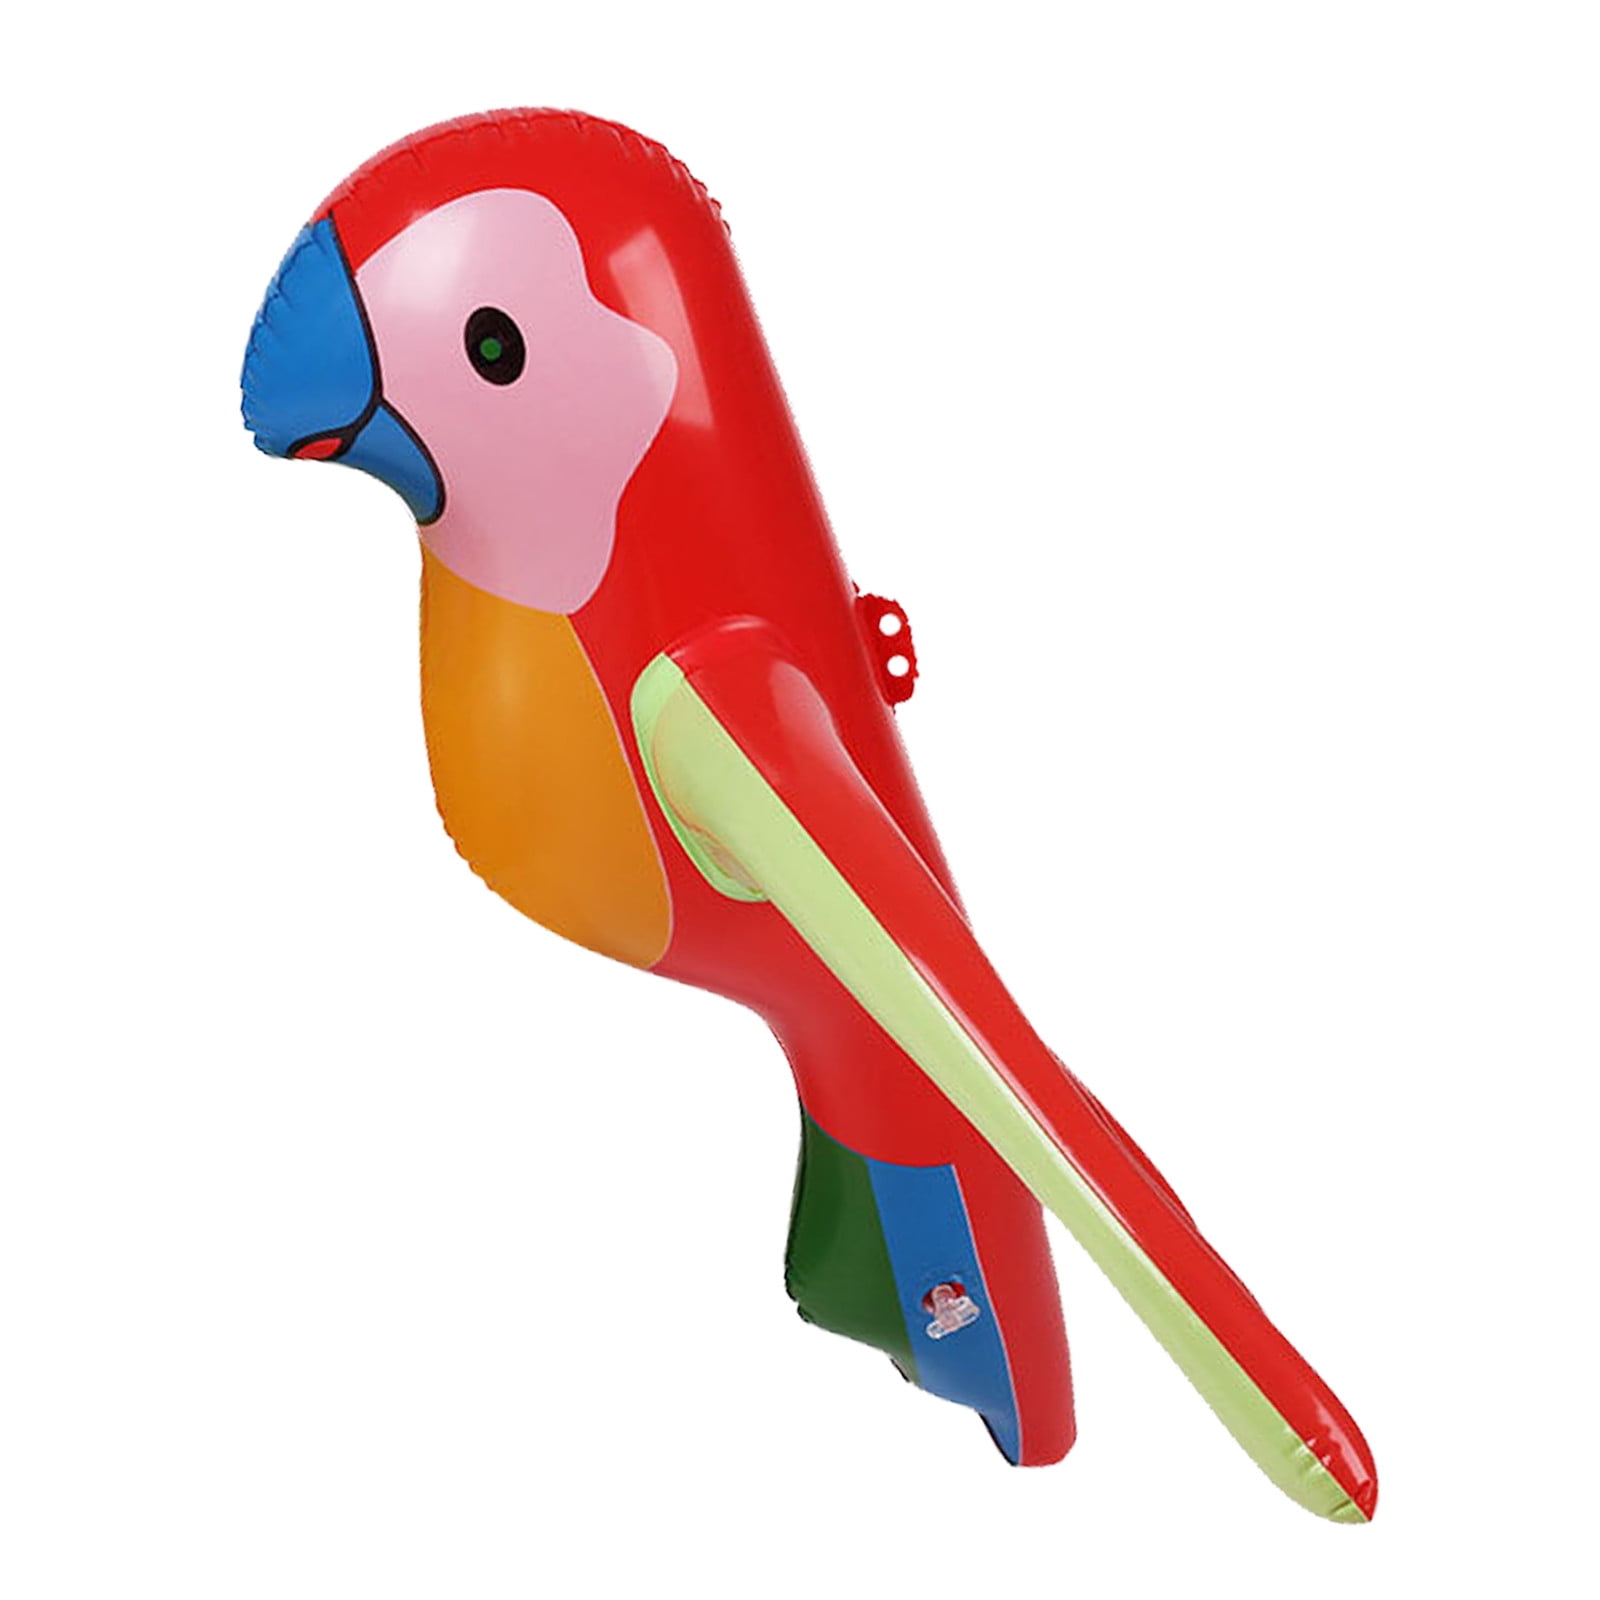 Inflatable new parrot easy to blow up fun for kids 